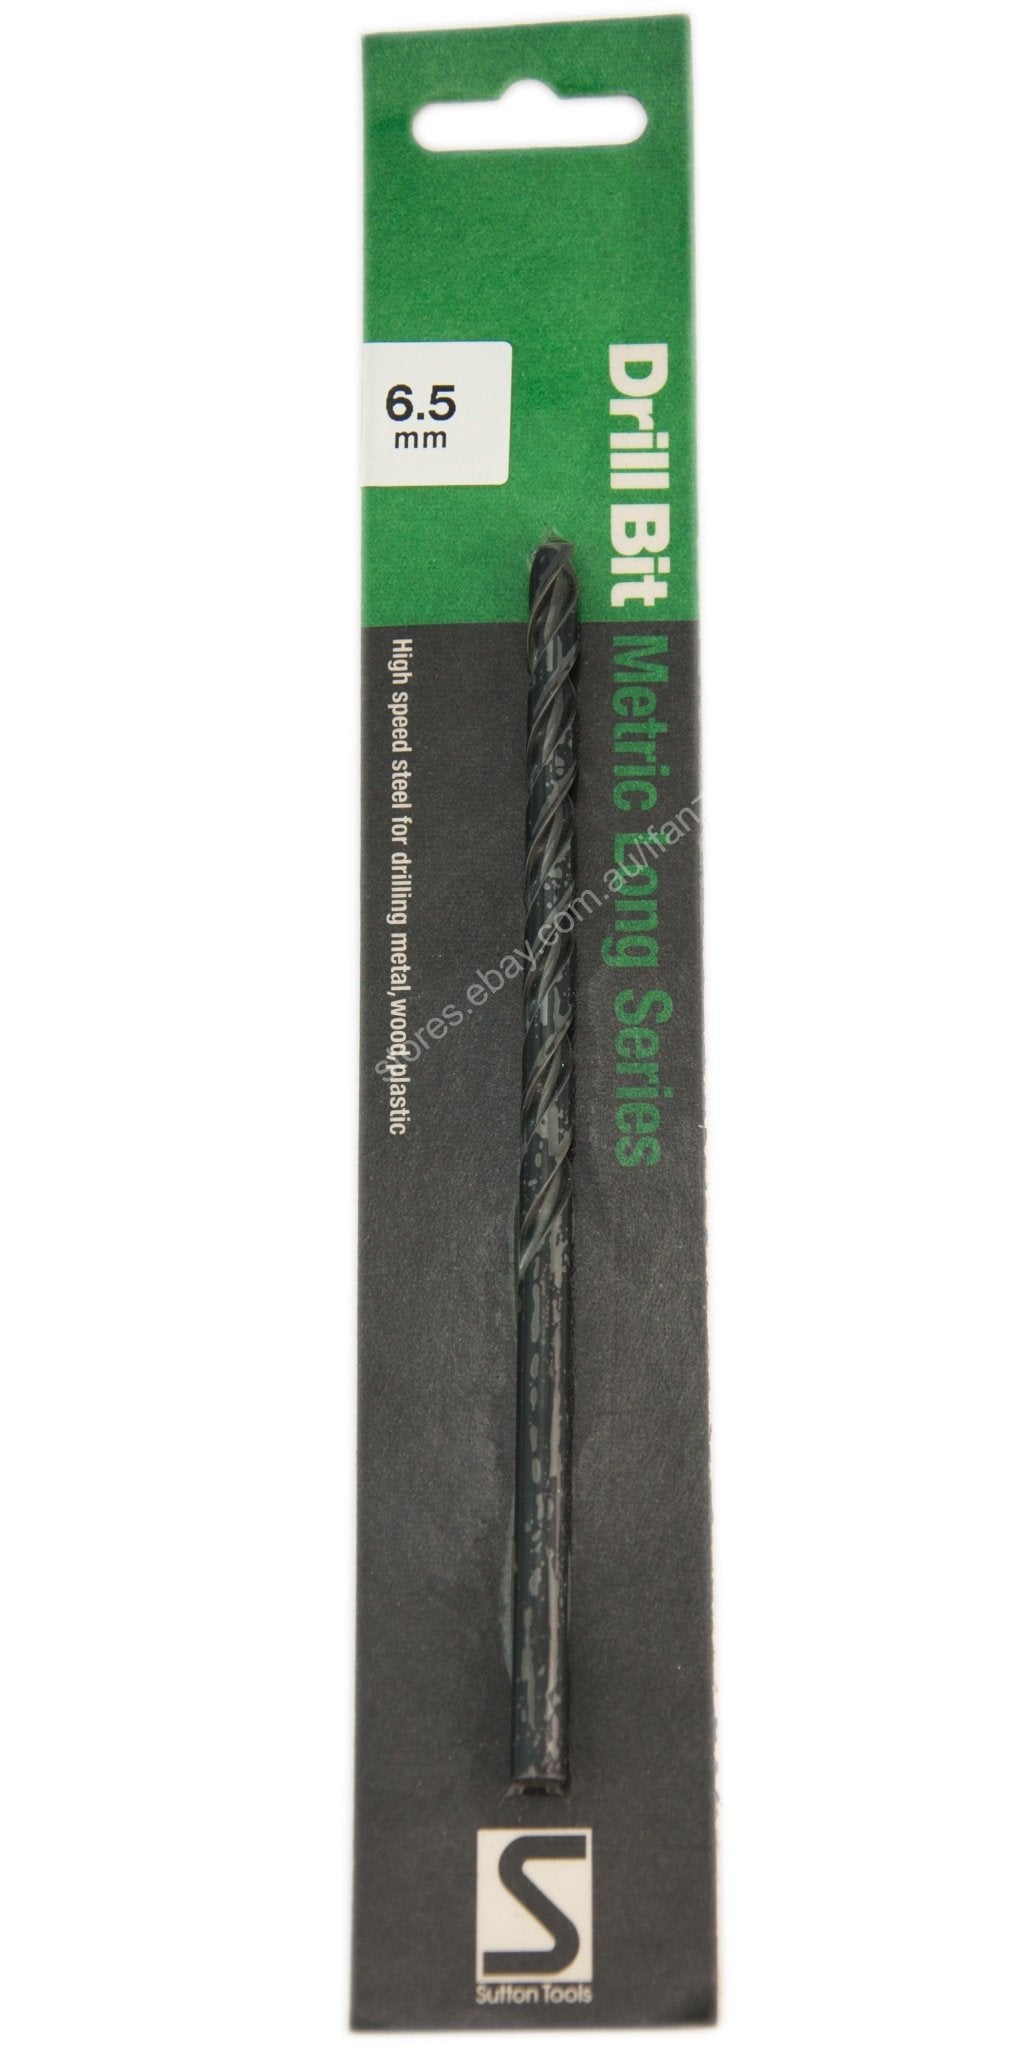 suttontools Metric HSS Long Series Drill Bits For Metal, Wood, Plastic 6.5mm - Double Bay Hardware